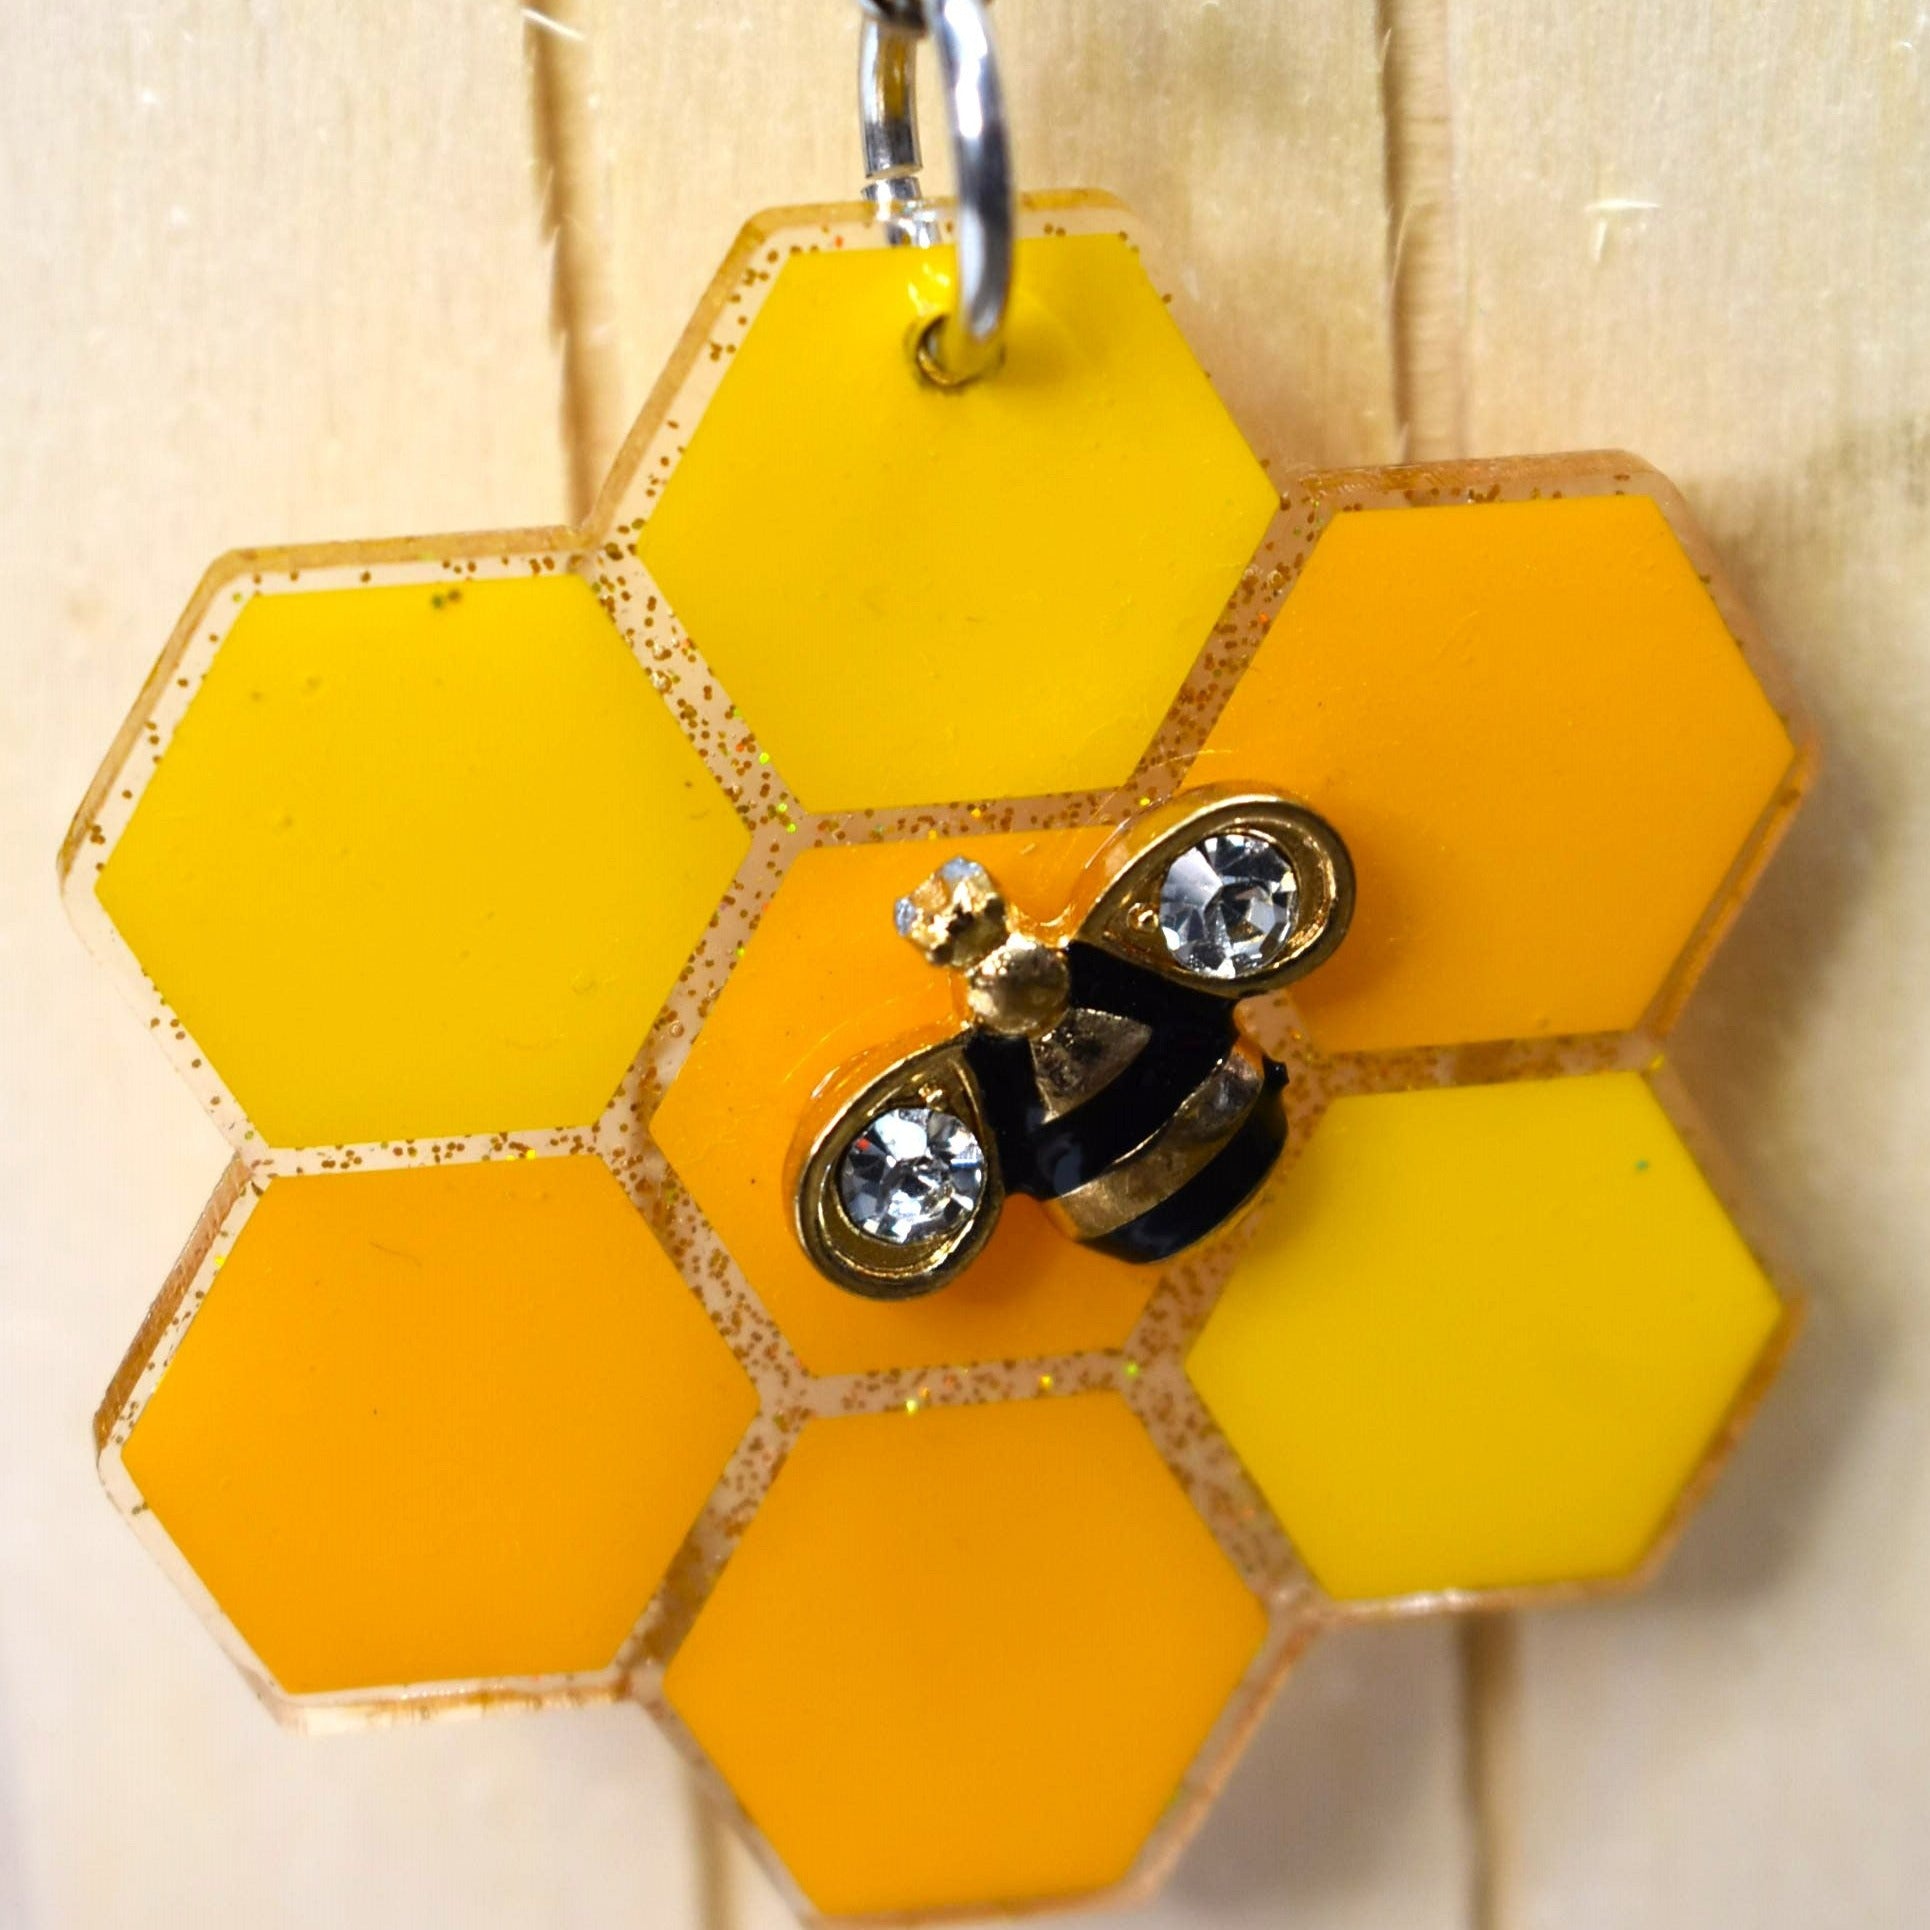 These Keychains are as busy as bees. With a Honey Comb pattern, glitter backs, and a sturdy acrylic resin material, you'll be buzzing with joy. Choose from 2 bee styles - a 2 wing or a 4 wing option.